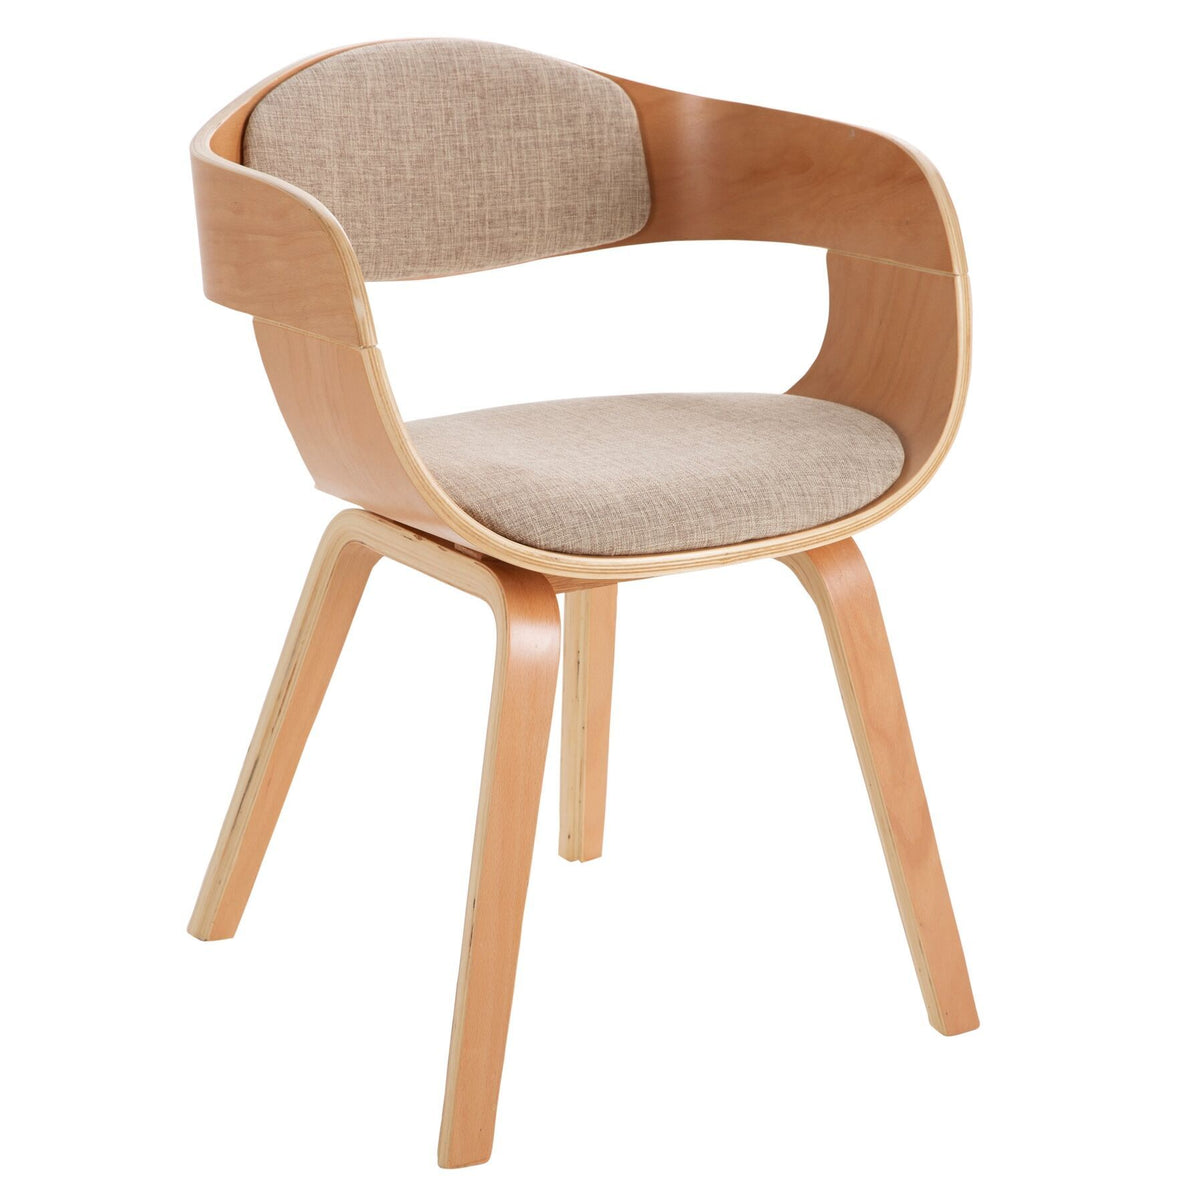 Tiger Wood Chair with Cushion (52 x 52 cm, Beige)